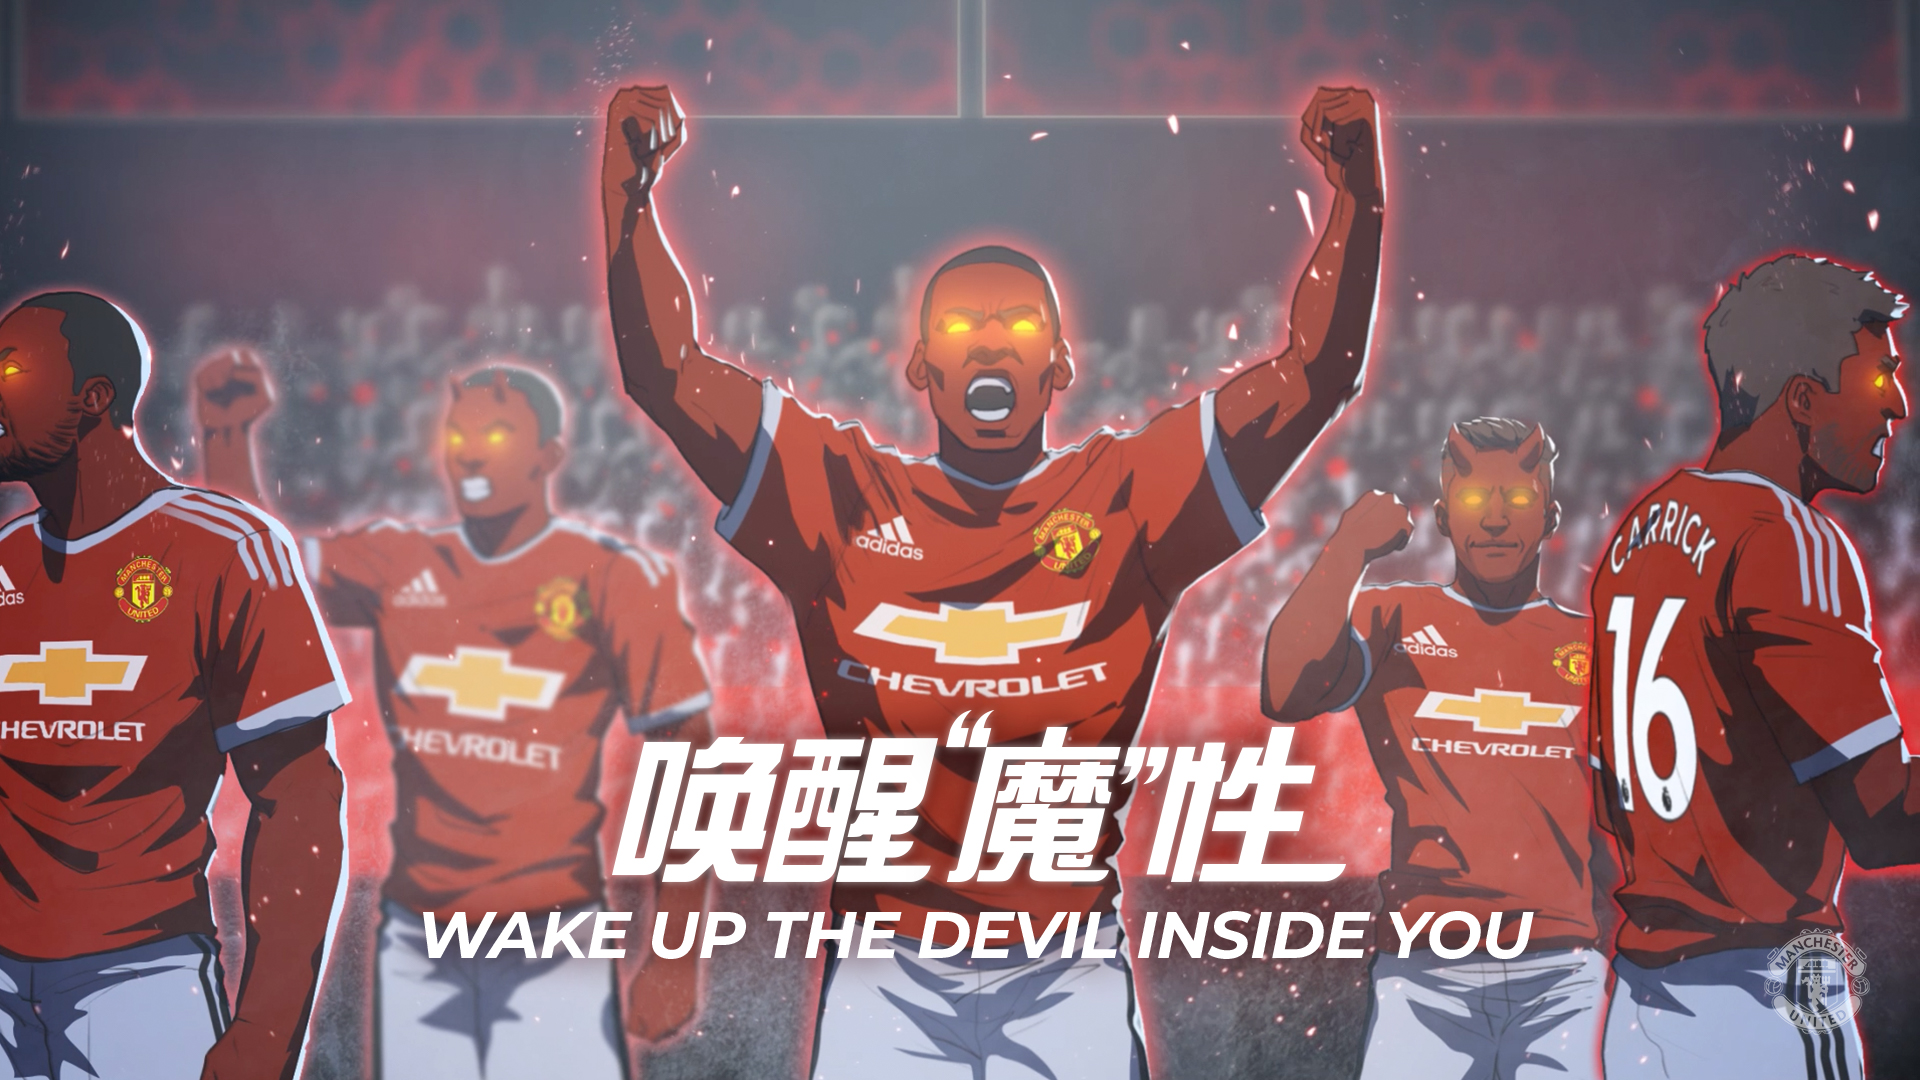 Manchester United ran an online campaign in China (Manchester United)